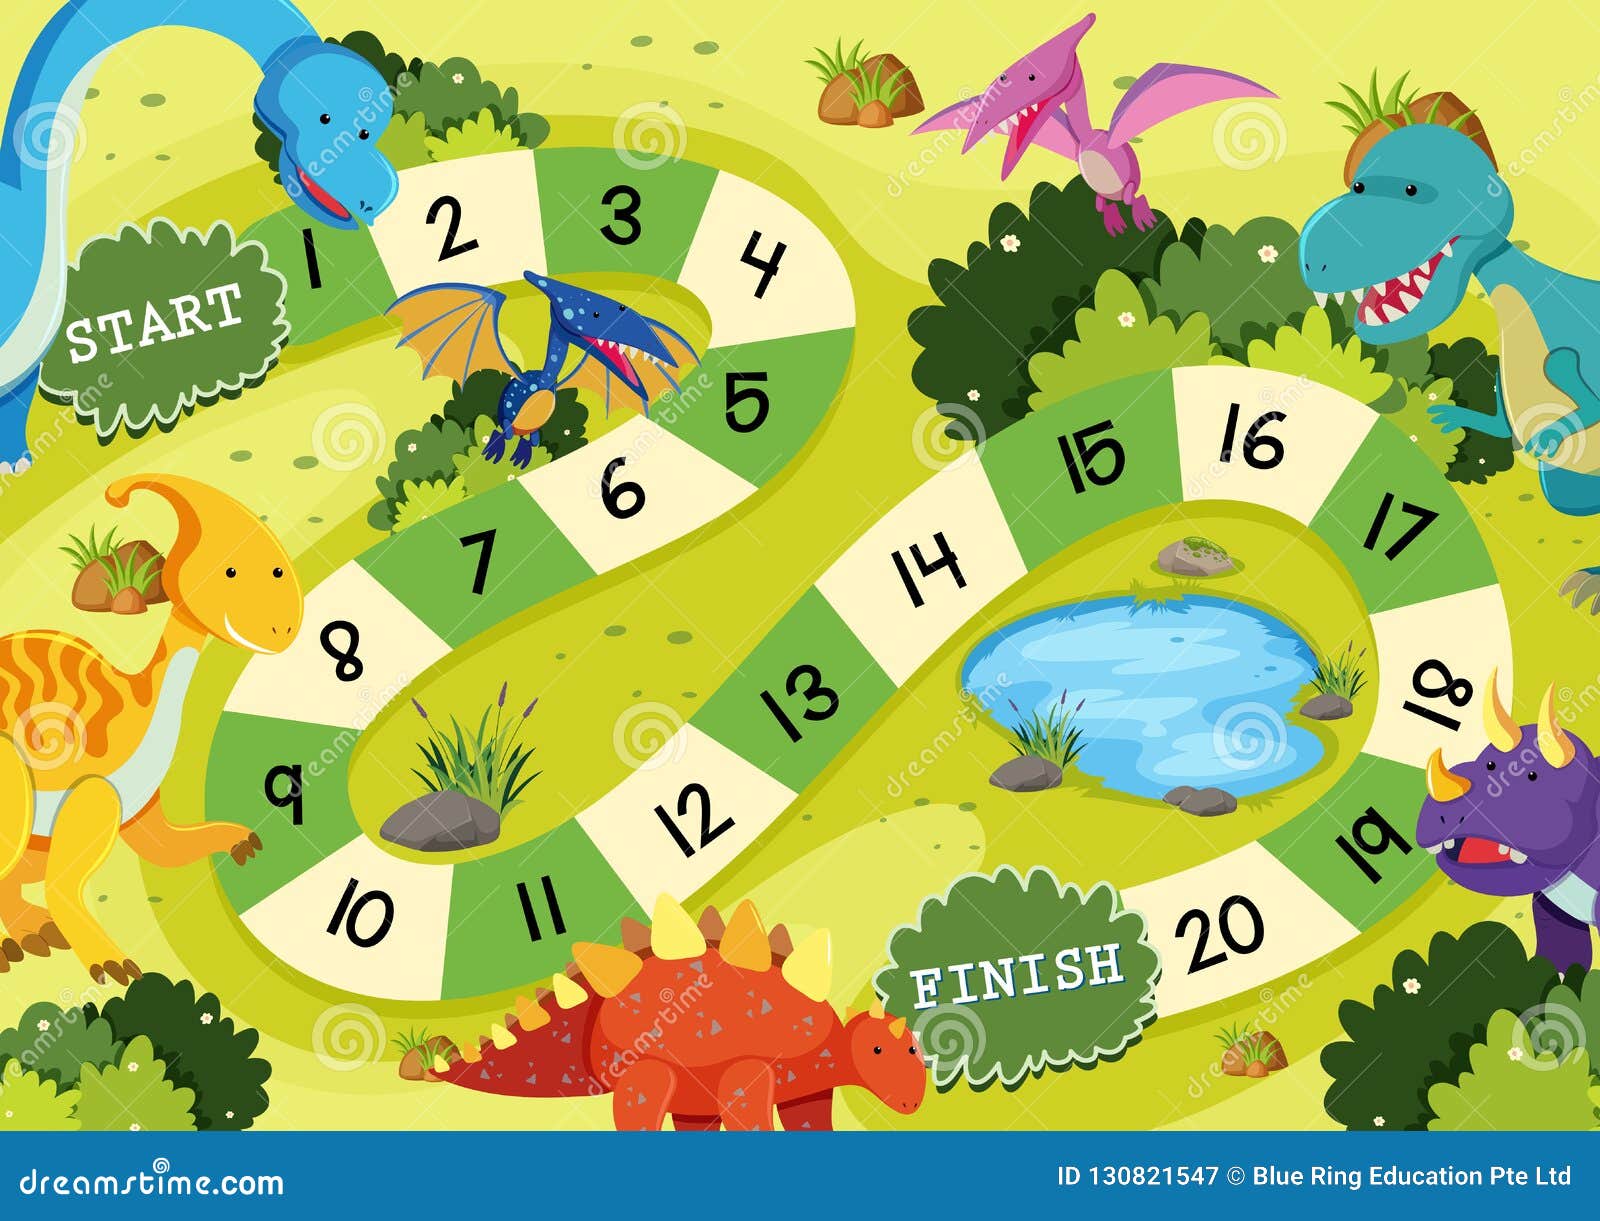 Dinosaur Game Board Map Stock Illustrations – 15 Dinosaur Game Board Map  Stock Illustrations, Vectors & Clipart - Dreamstime